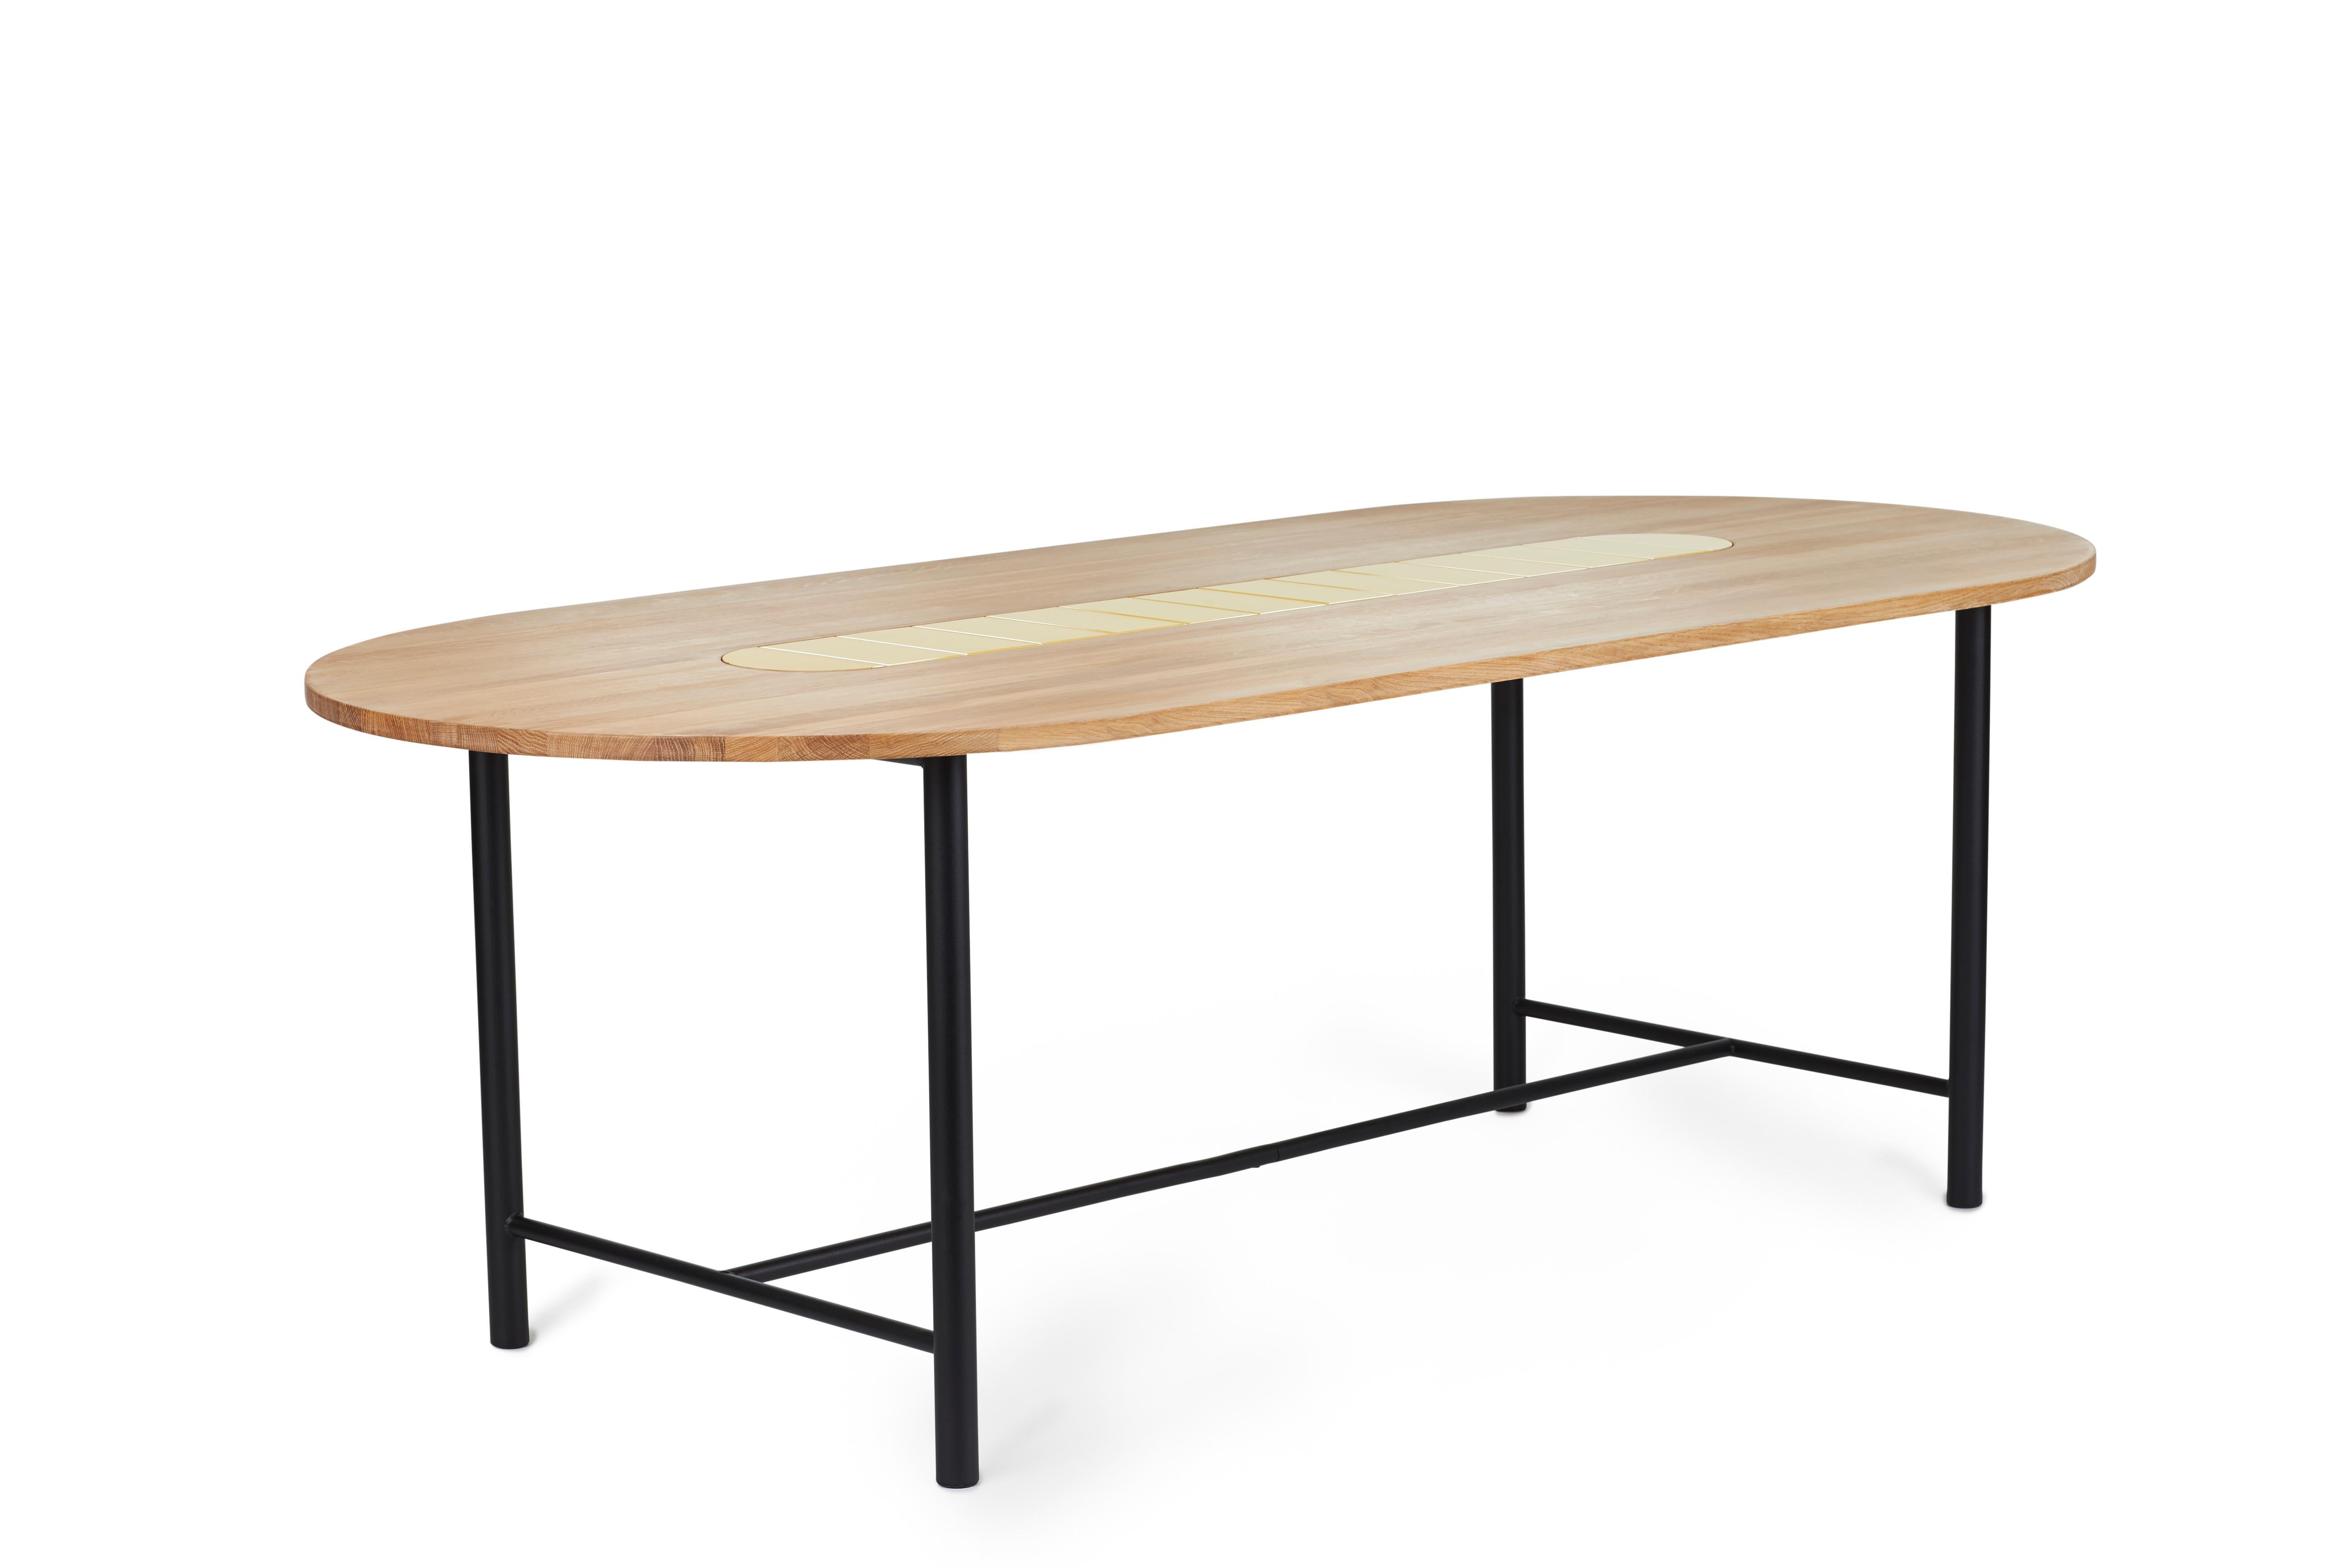 For Sale: Yellow (Butter yellow) Be My Guest Large Dining Table, by Charlotte Høncke from Warm Nordic 2